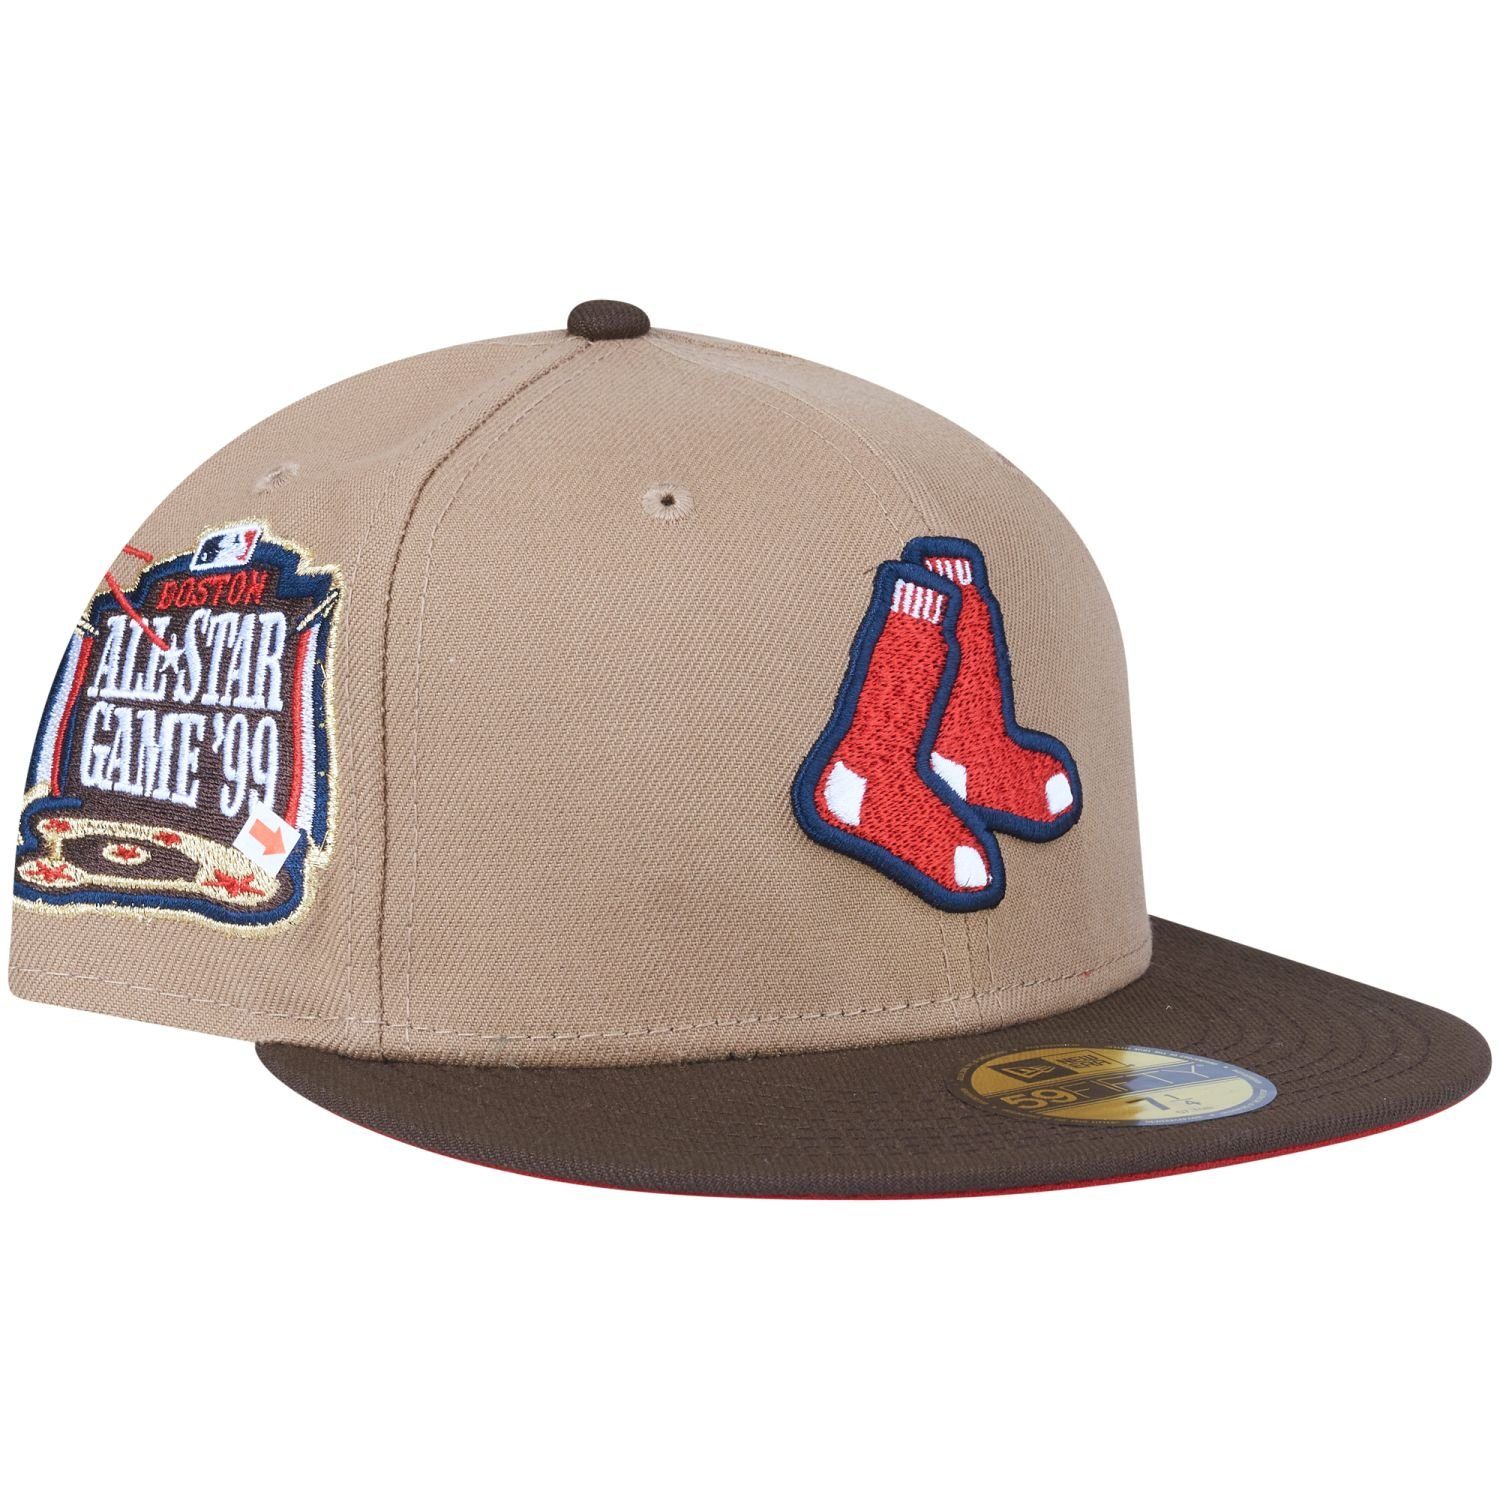 New Era Fitted Cap 59Fifty COOPERSTOWN Boston Red Sox ASG